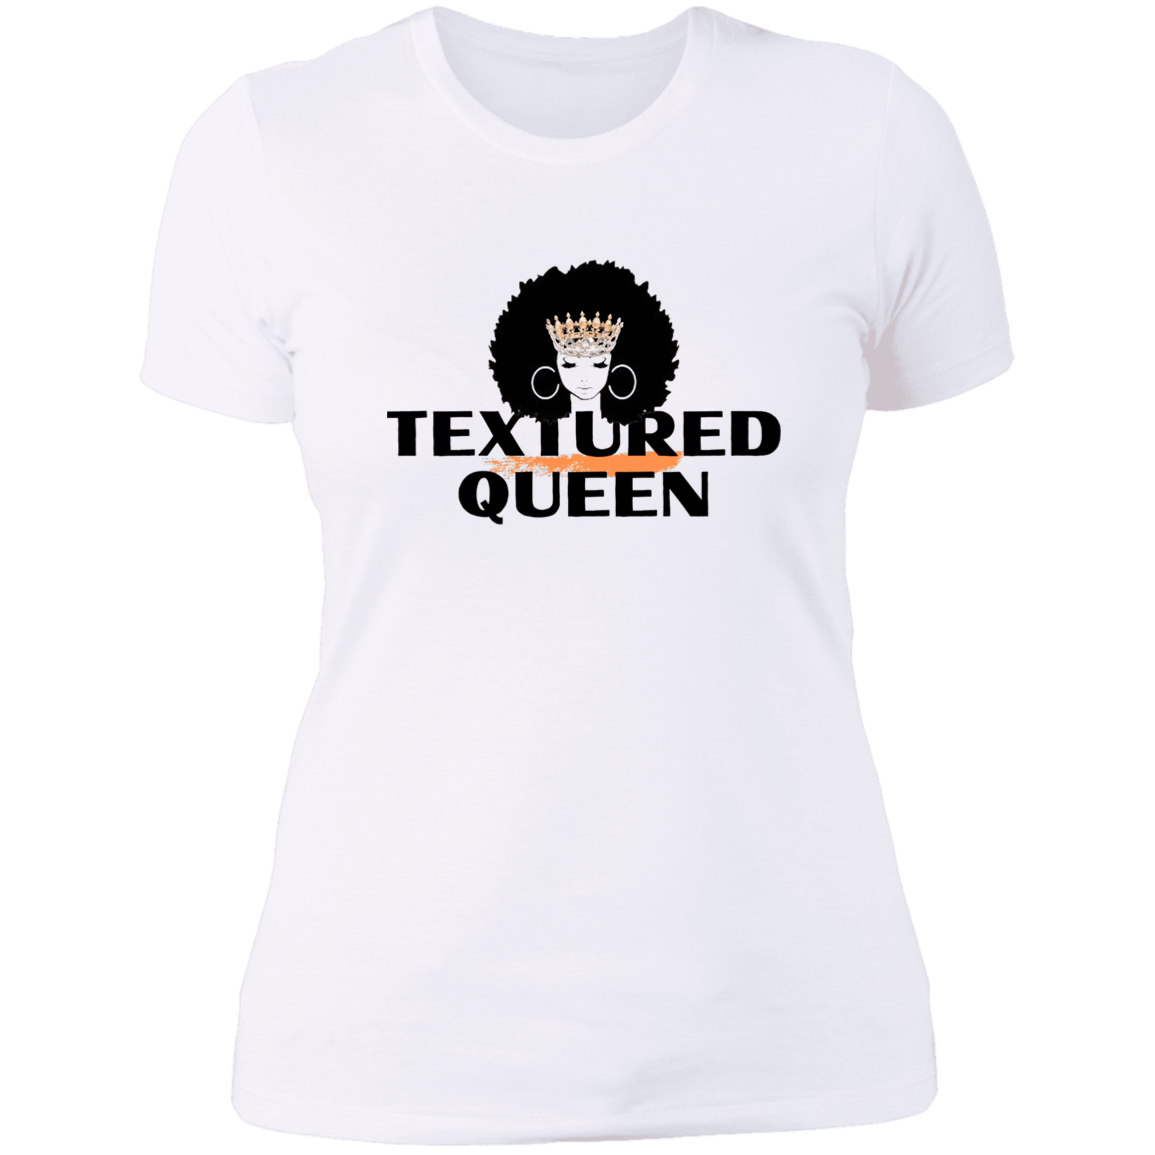 White Textured Queen Tee with Her and Gold Tiara